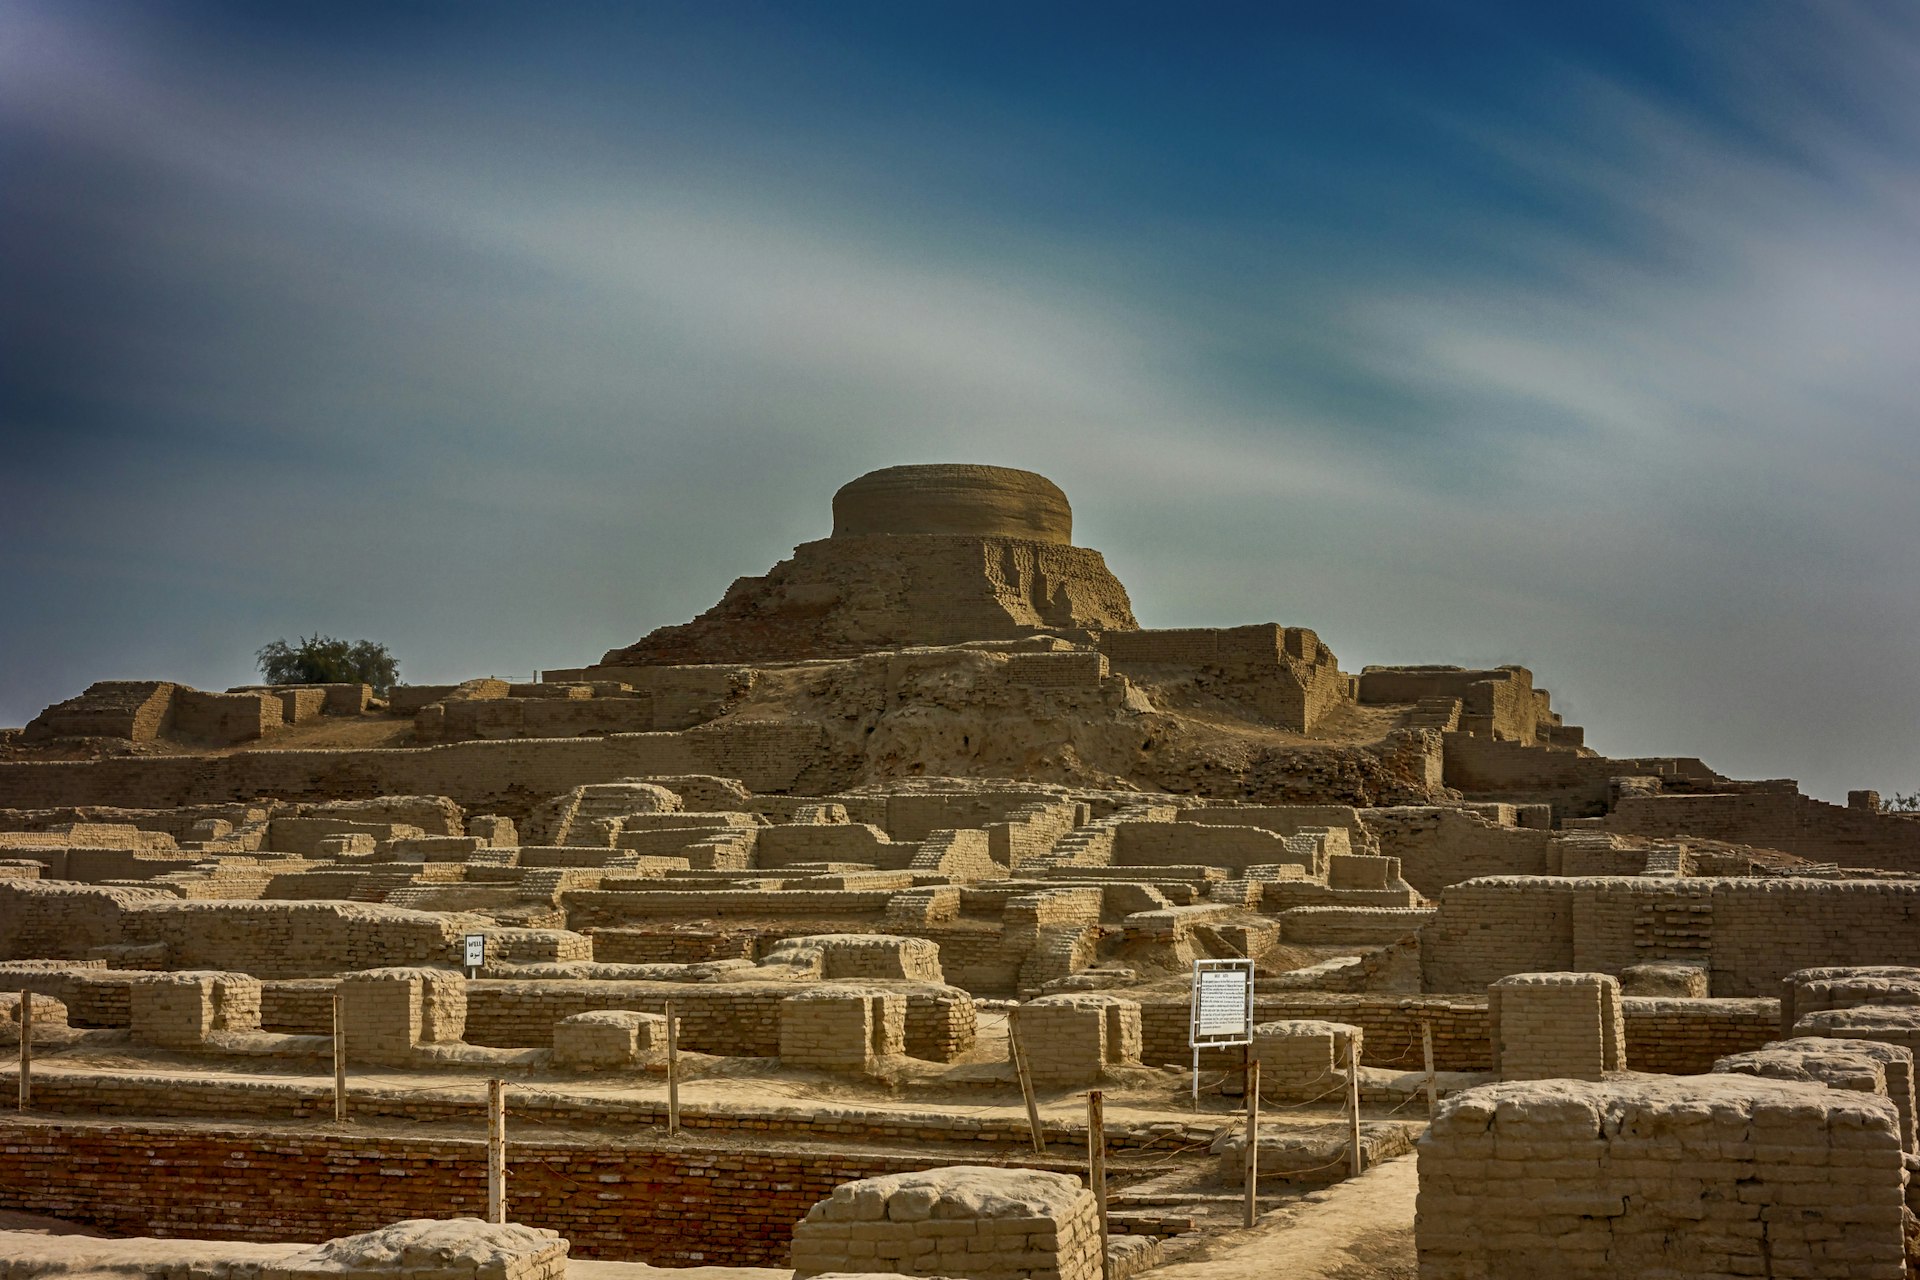 The partially excavated archeological site of Mohenjo-daro in Pakistan